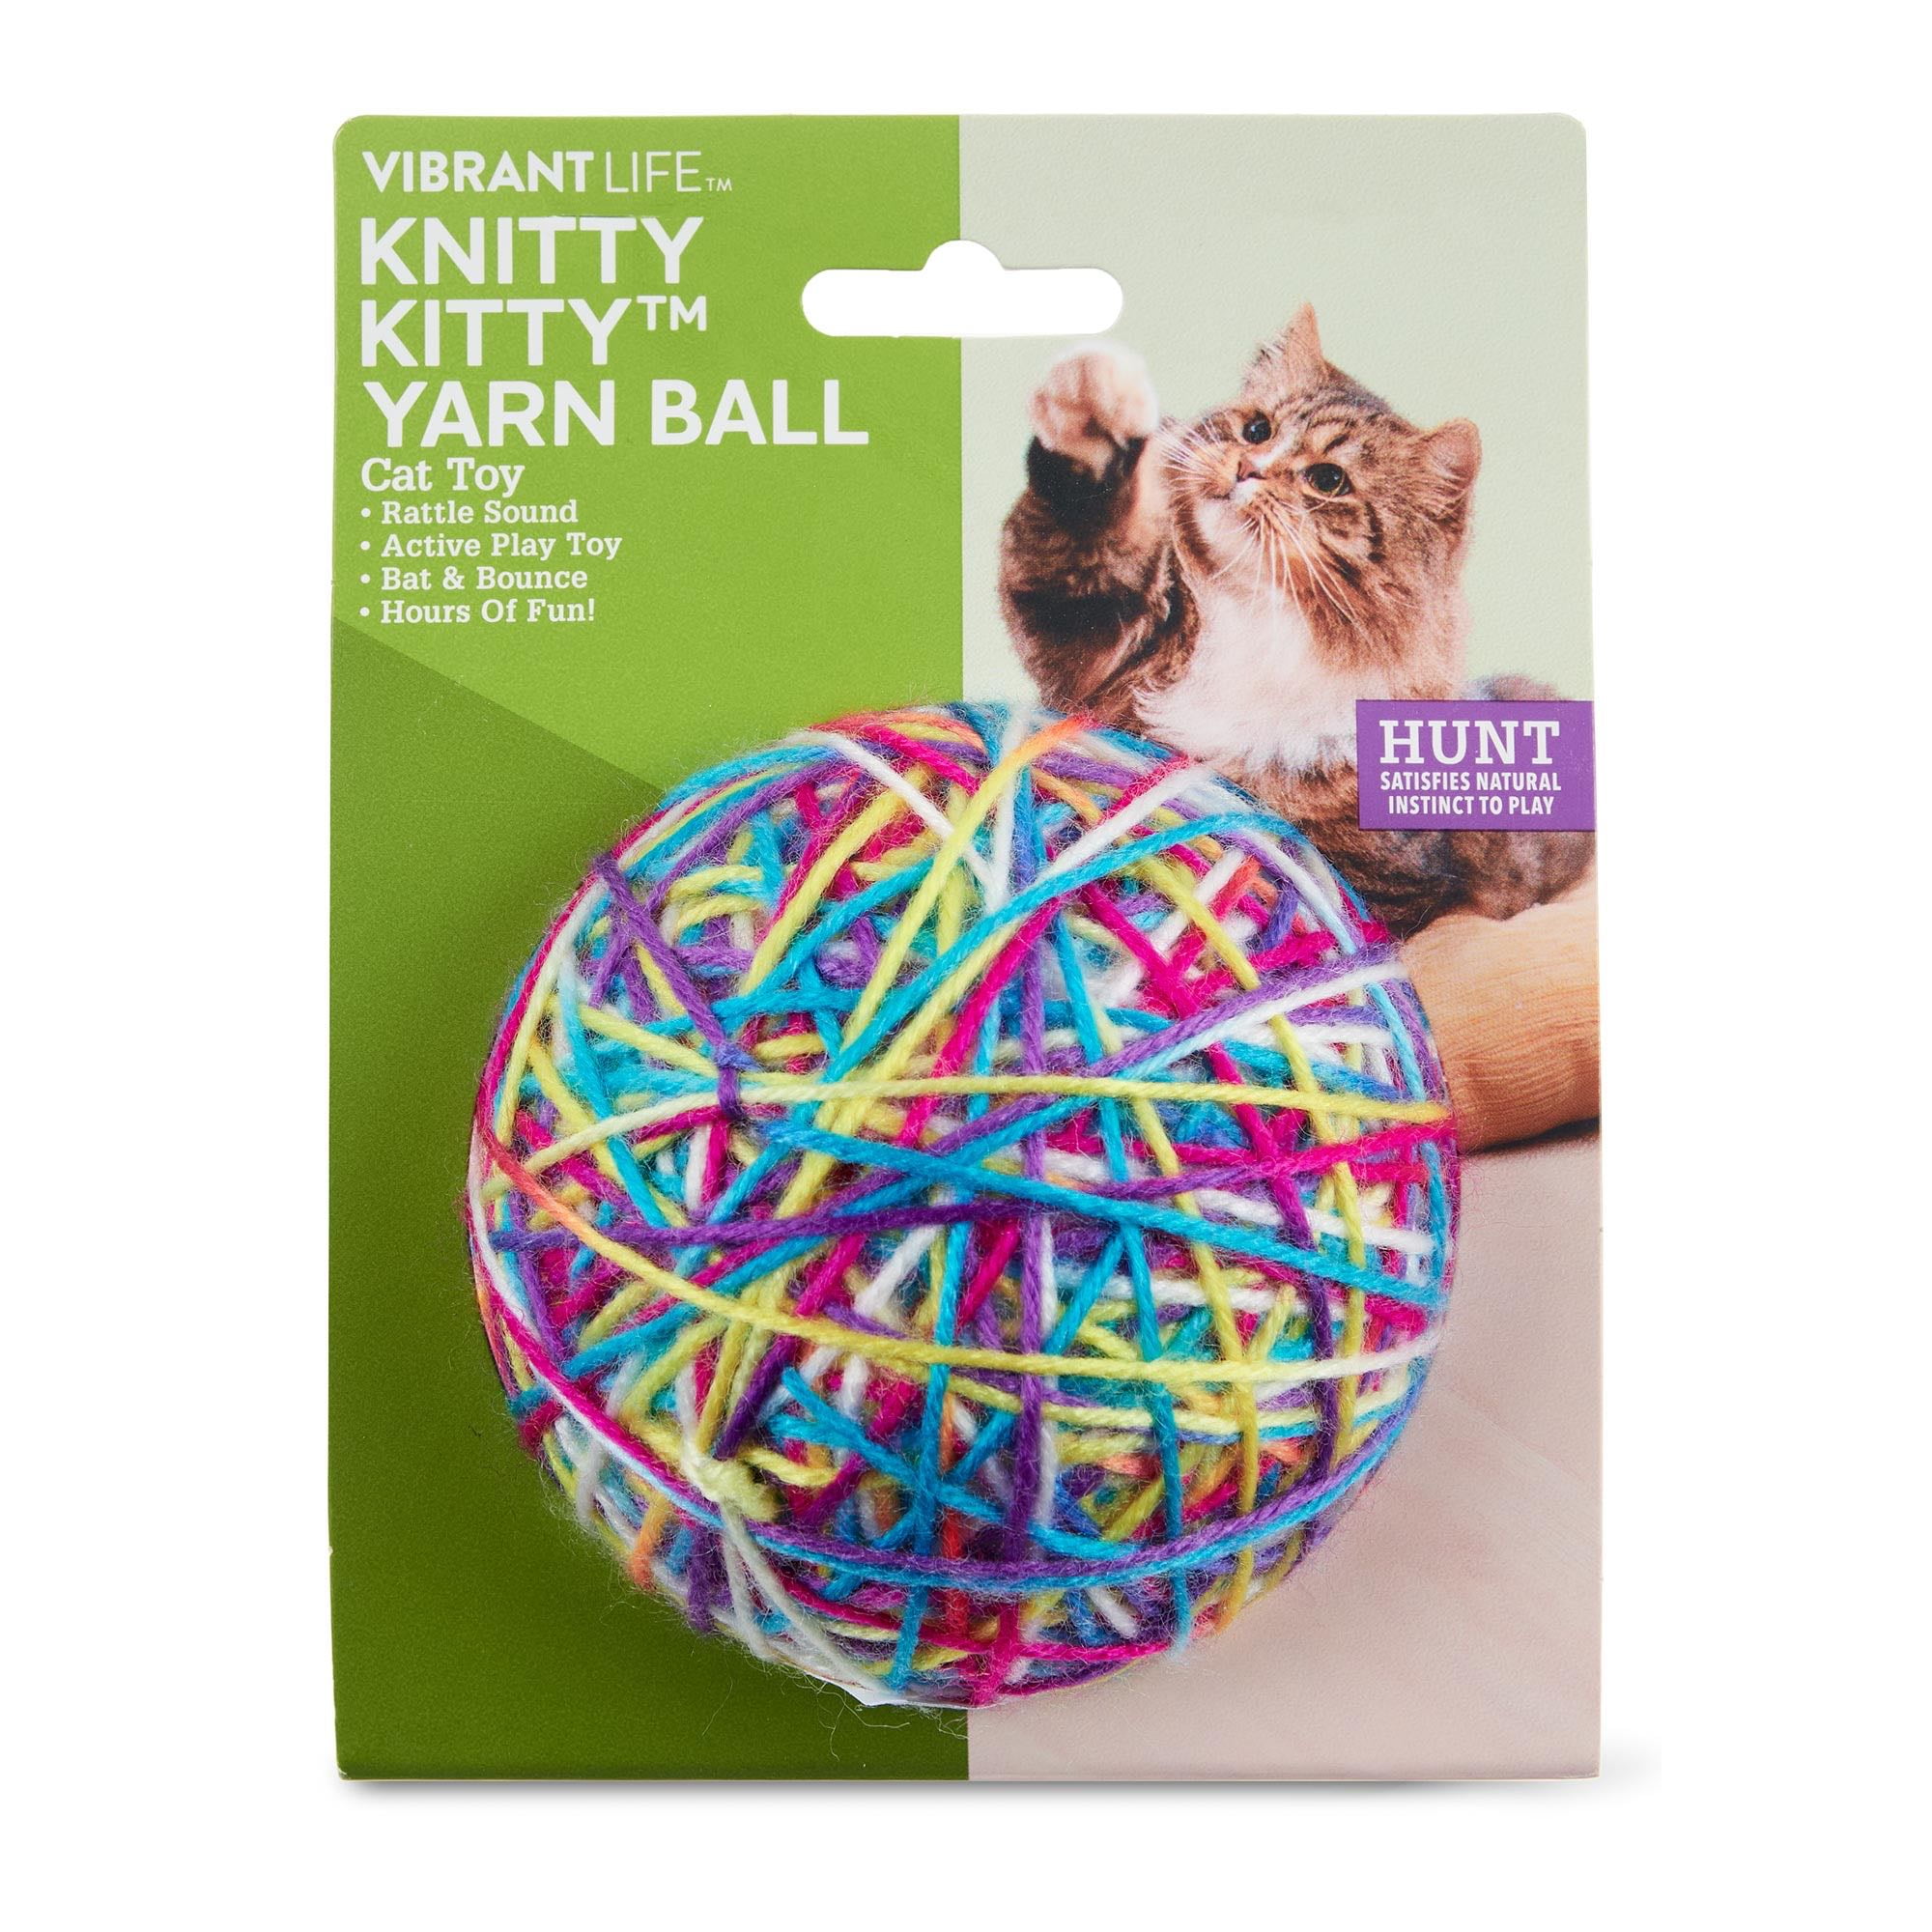 Vibrant Life Knitty Kitty Multi-Colored Yarn Ball, Large Yarn Ball, Rattling Cat Toy for Cats and Kittens